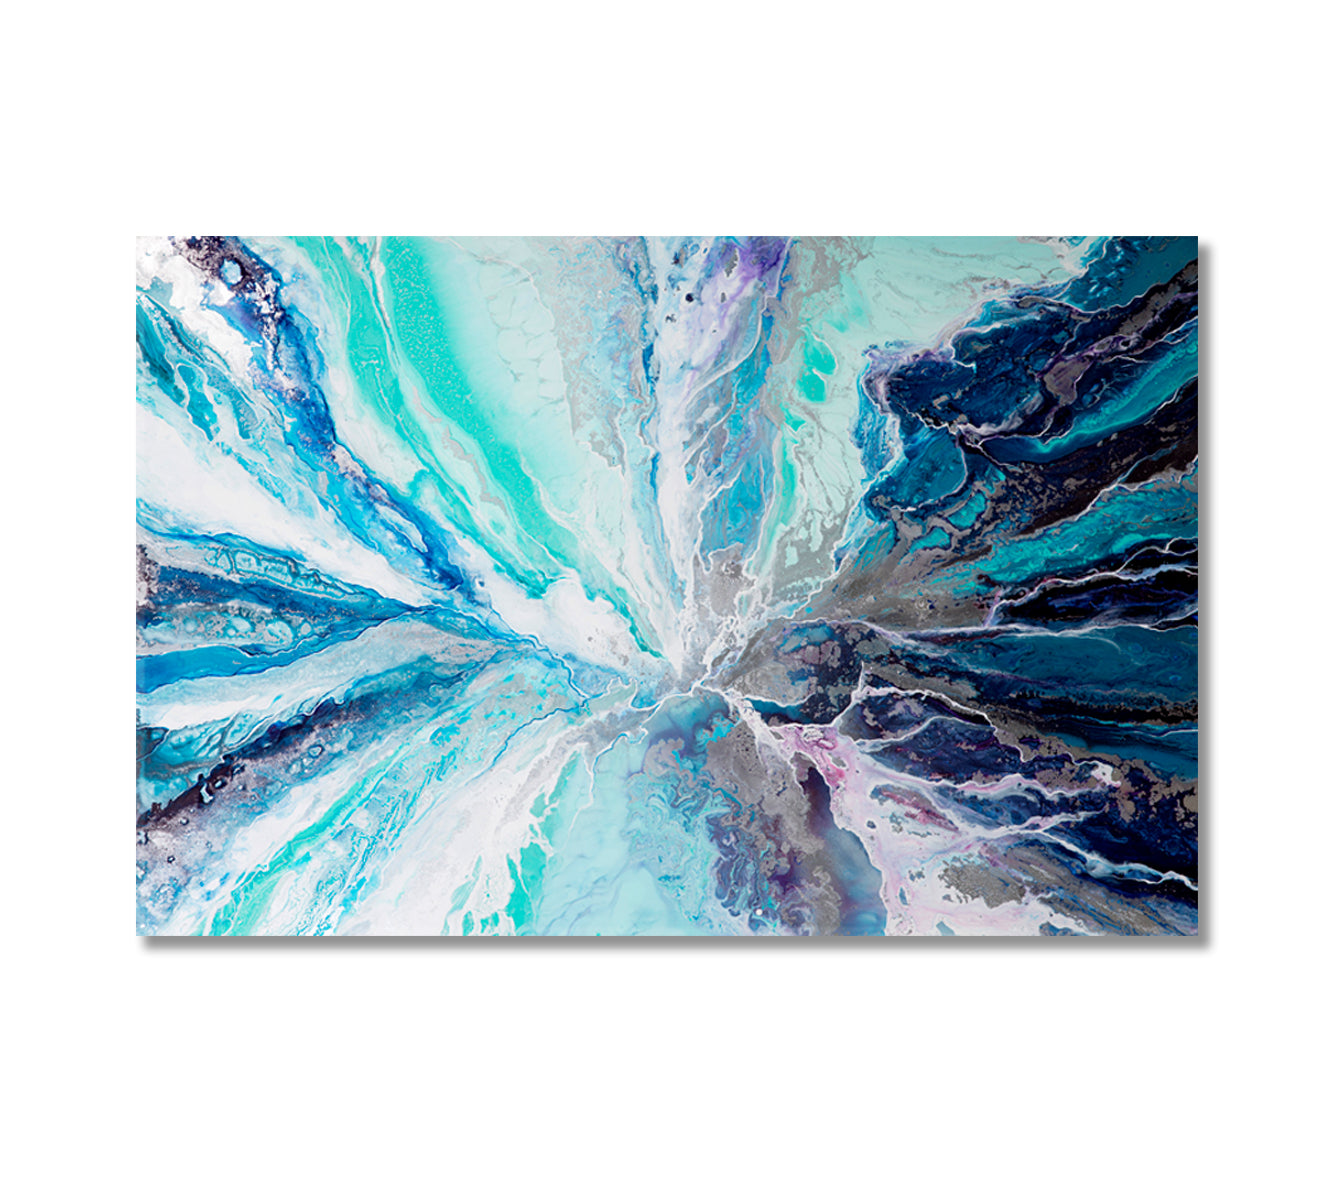 Stunning Light Blue and Dark Blue Abstract Marble Shapes Canvas Print-Canvas Print-CetArt-1 Panel-24x16 inches-CetArt